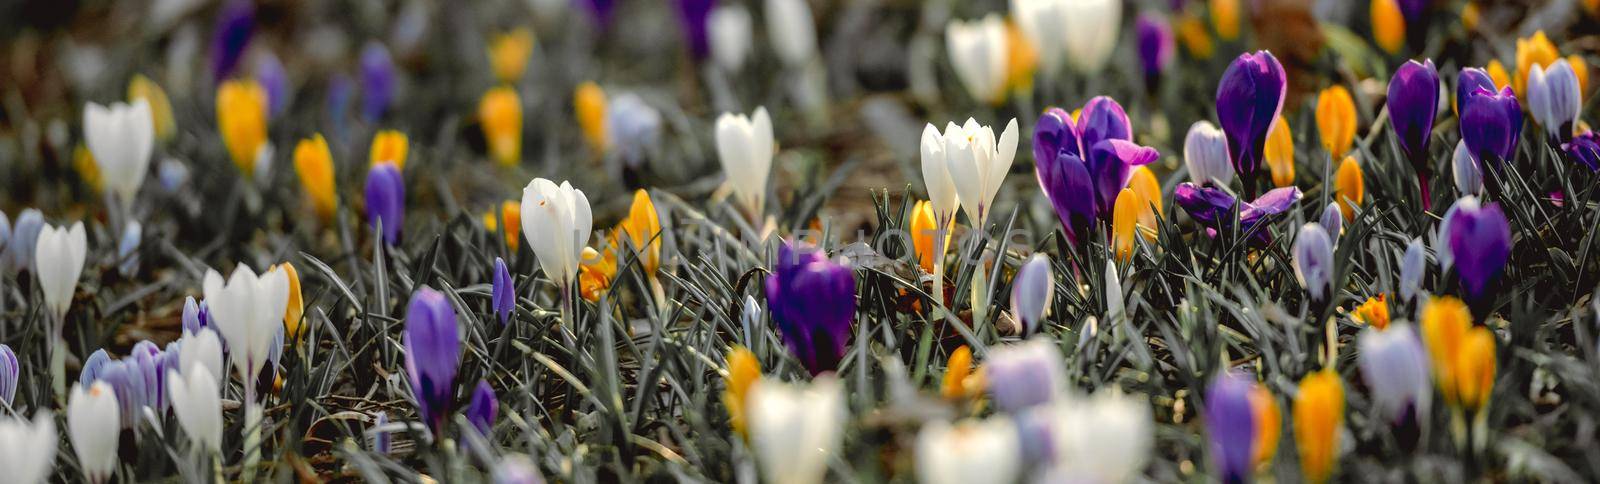 Colorful crocus flowers at springtime. Beautiful blossom at spring nature